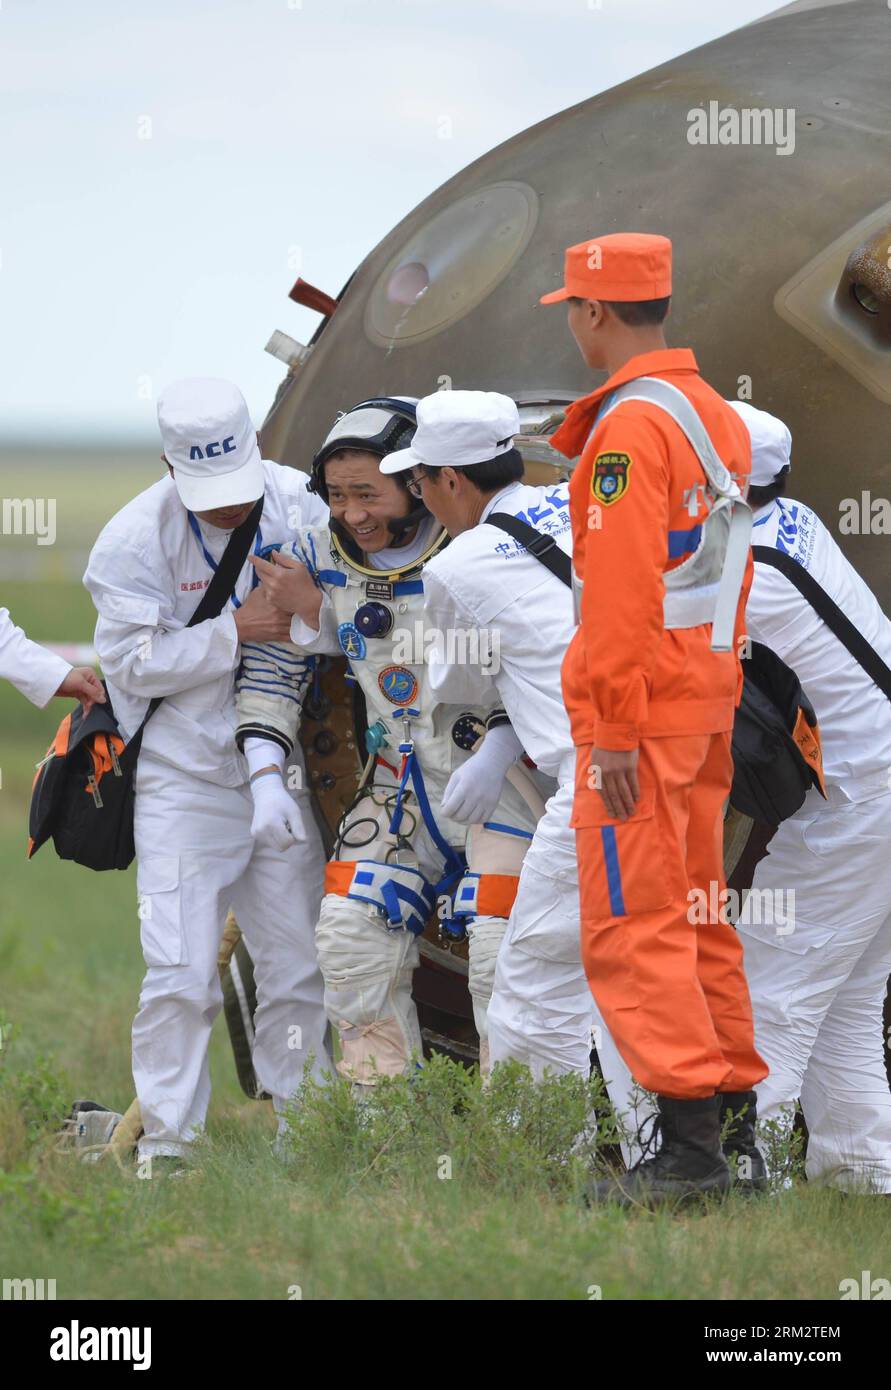 Bildnummer: 59902252  Datum: 26.06.2013  Copyright: imago/Xinhua (130626) -- SIZIWANG BANNER, June 26, 2013 (Xinhua) -- Astronaut Nie Haisheng (2nd L) gets out of the re-entry capsule of China s Shenzhou-10 spacecraft after its landing in north China s Inner Mongolia Autonomous Region on June 26, 2013. Commander-in-chief of China s manned space program Zhang Youxia has announced that the Shenzhou-10 mission was successful after the three crewmembers landed safely and left the spacecraft s re-entry module Wednesday morning. (Xinhua/Zhang Ling) (ry) CHINA-SCIENCE-SHENZHOU-10 SPACECRAFT-RETURN (C Stock Photo